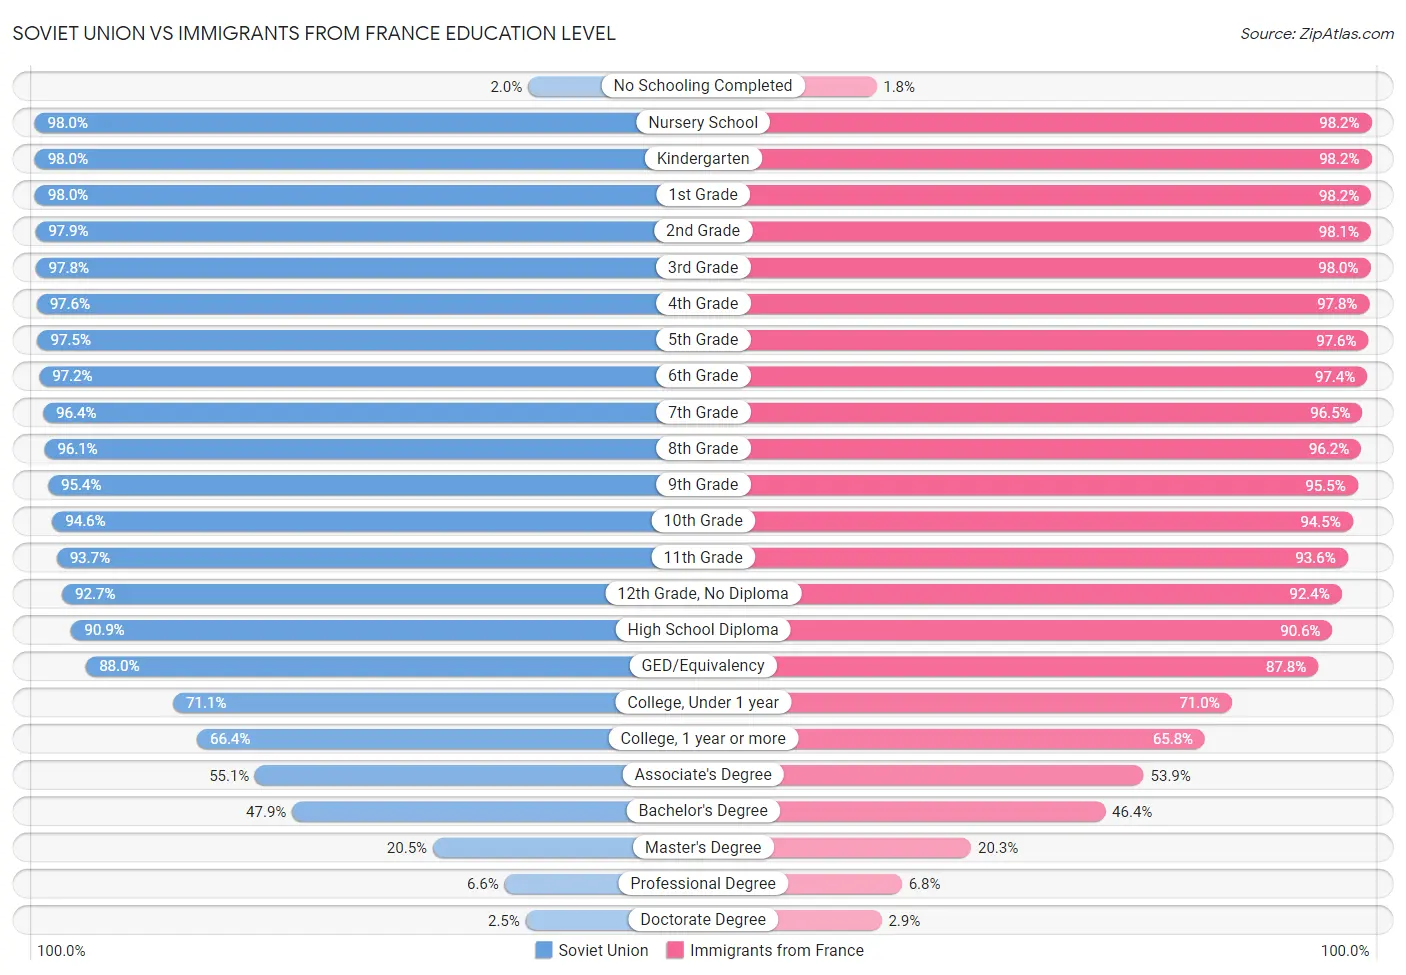 Soviet Union vs Immigrants from France Education Level